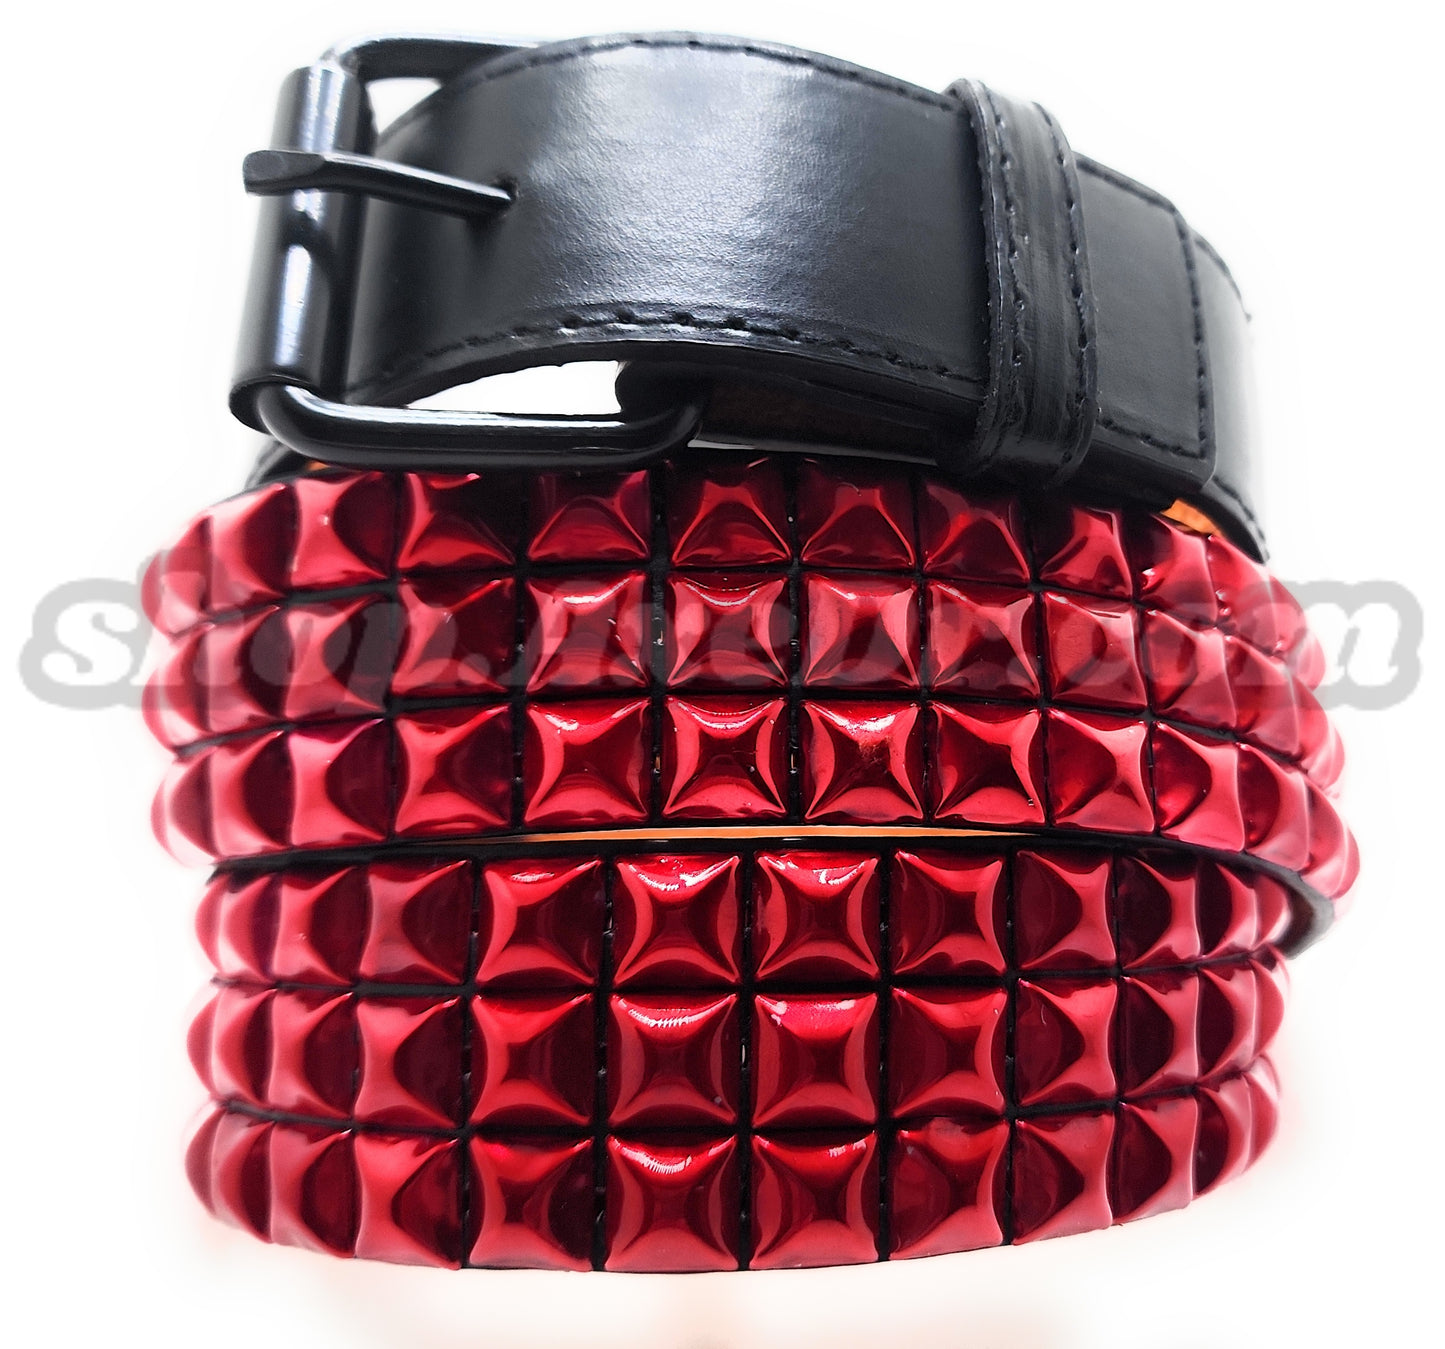 Handmade Candy Apple Red Pyramid Studded Stitched Leather Belt Punk